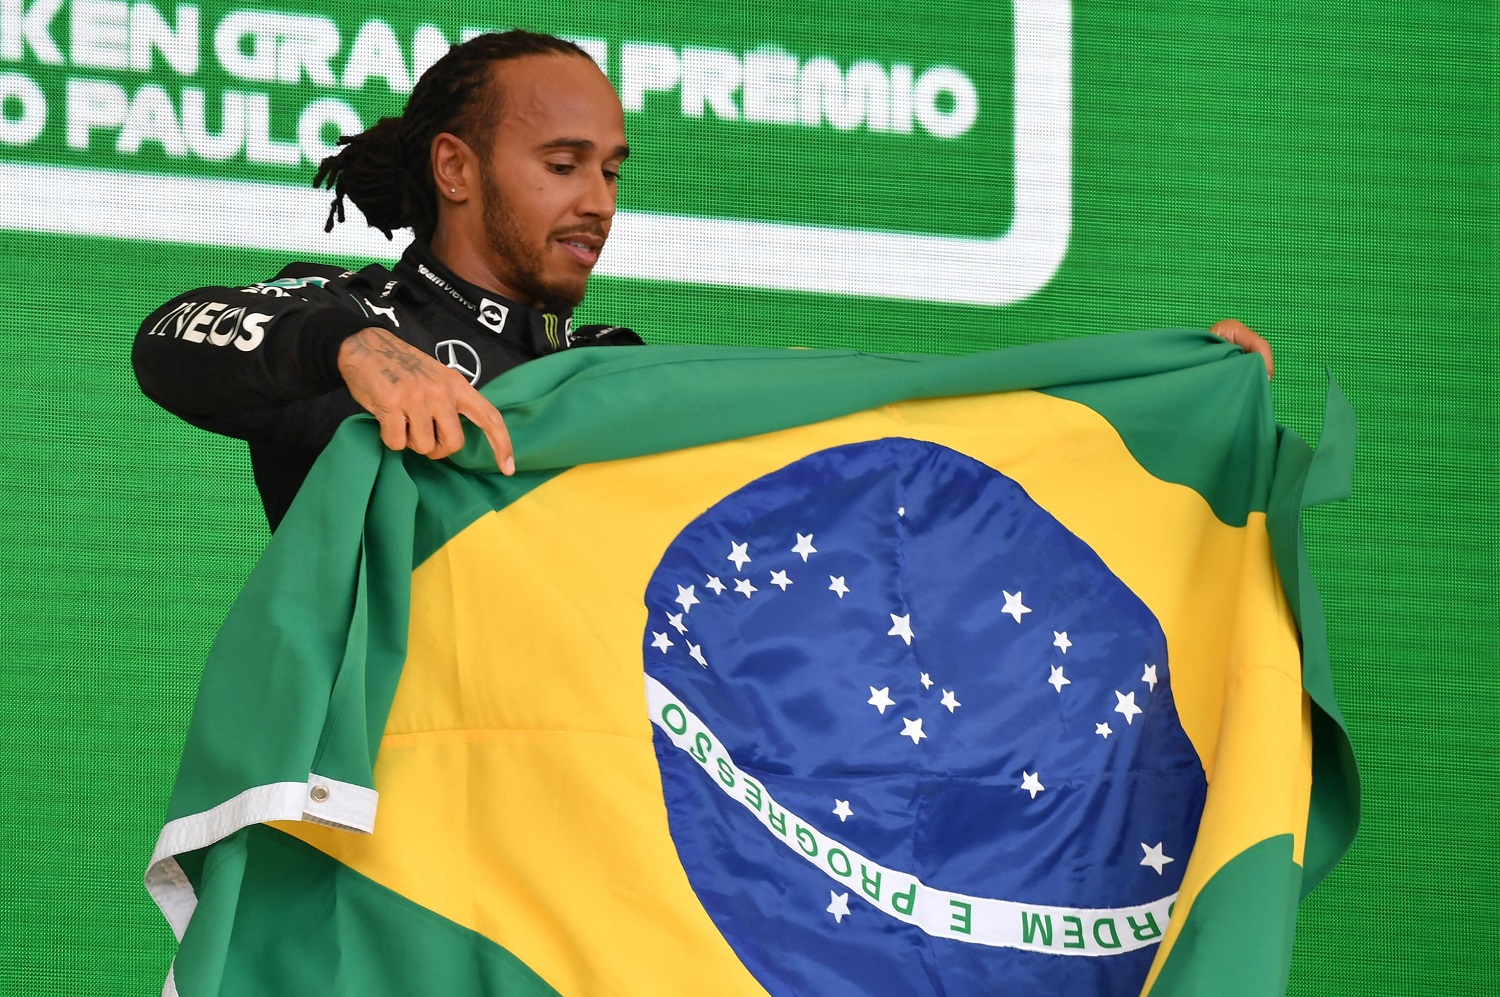 Mercedes' British driver Lewis Hamilton displays a Brazilian flag as he celebrates on the podium after winning Brazil's Formula One Sao Paulo Grand Prix at the Autodromo Jose Carlos Pace on Nov. 14, 2021. | Nelson Almeida / AFP via Getty Images